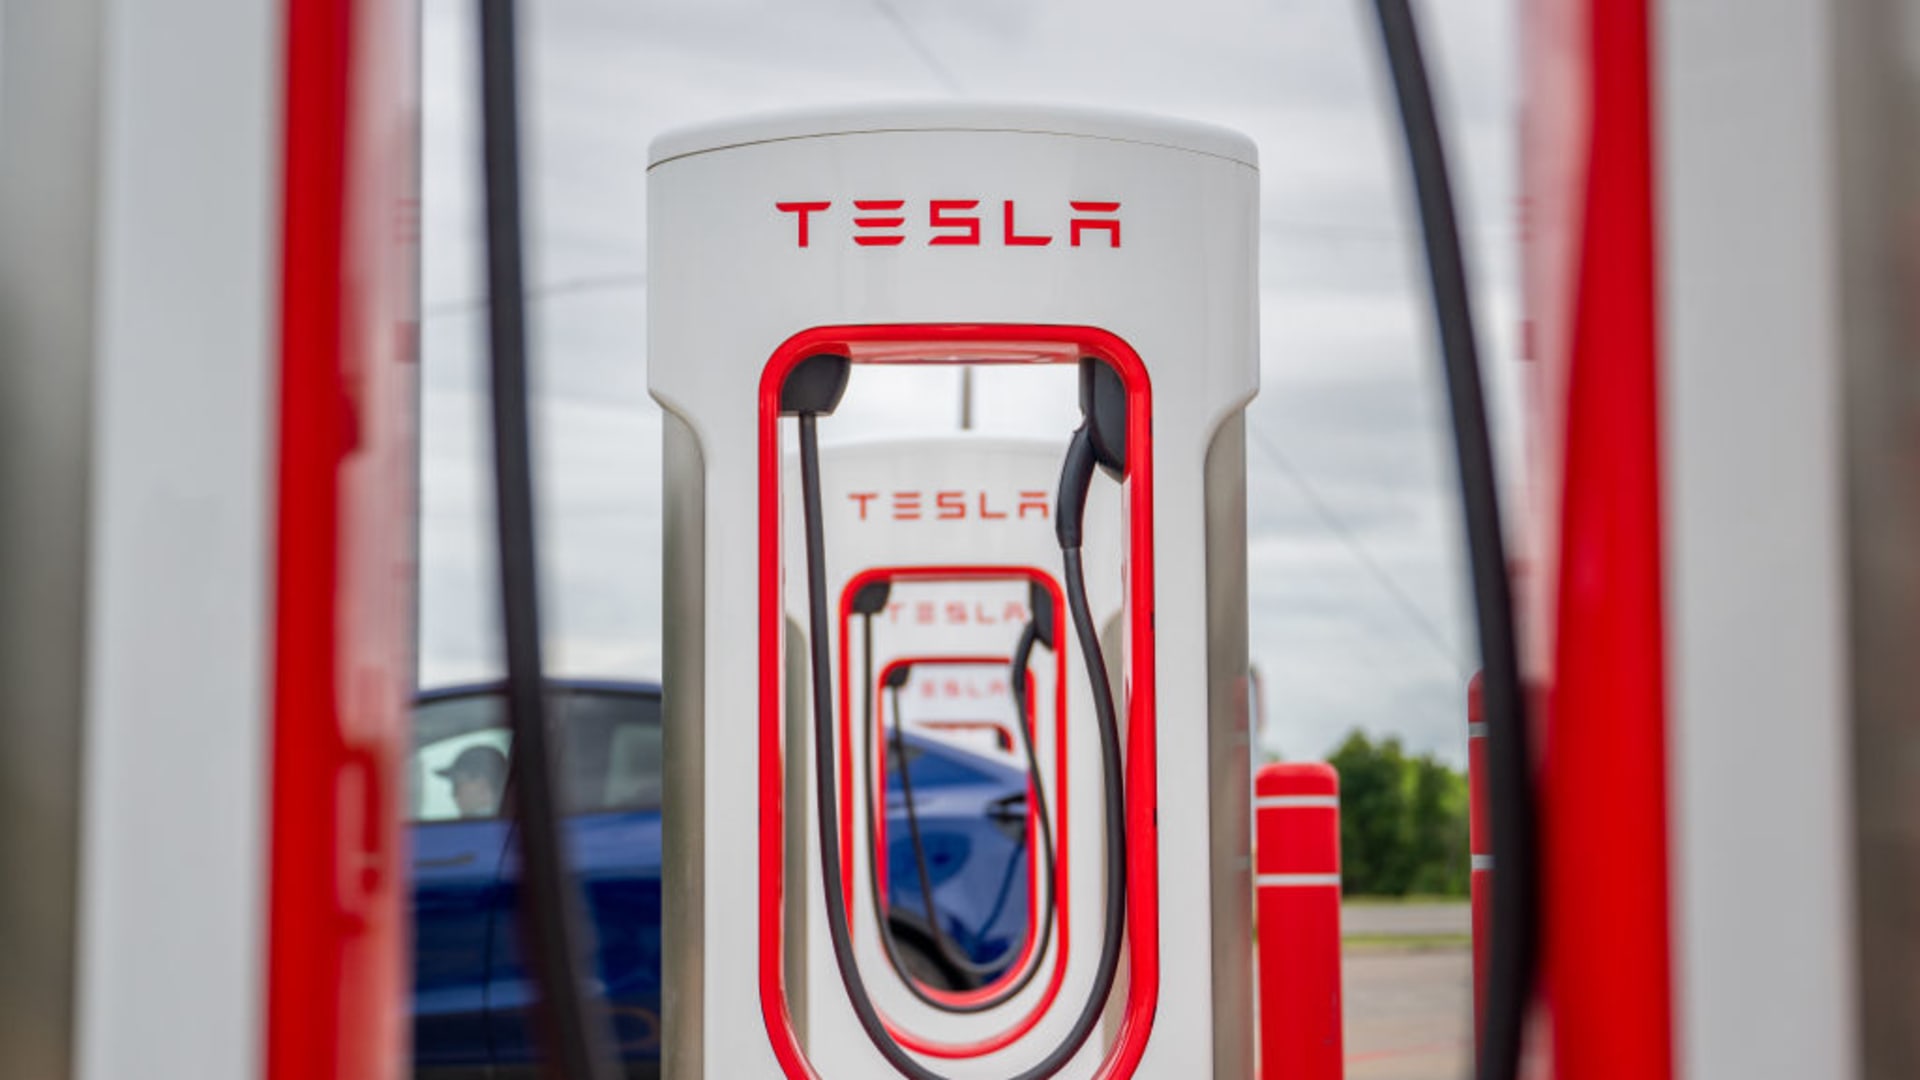 Tesla shares drop nearly 6% after Musk cuts about 500 jobs in Supercharger team | MuaneToraya